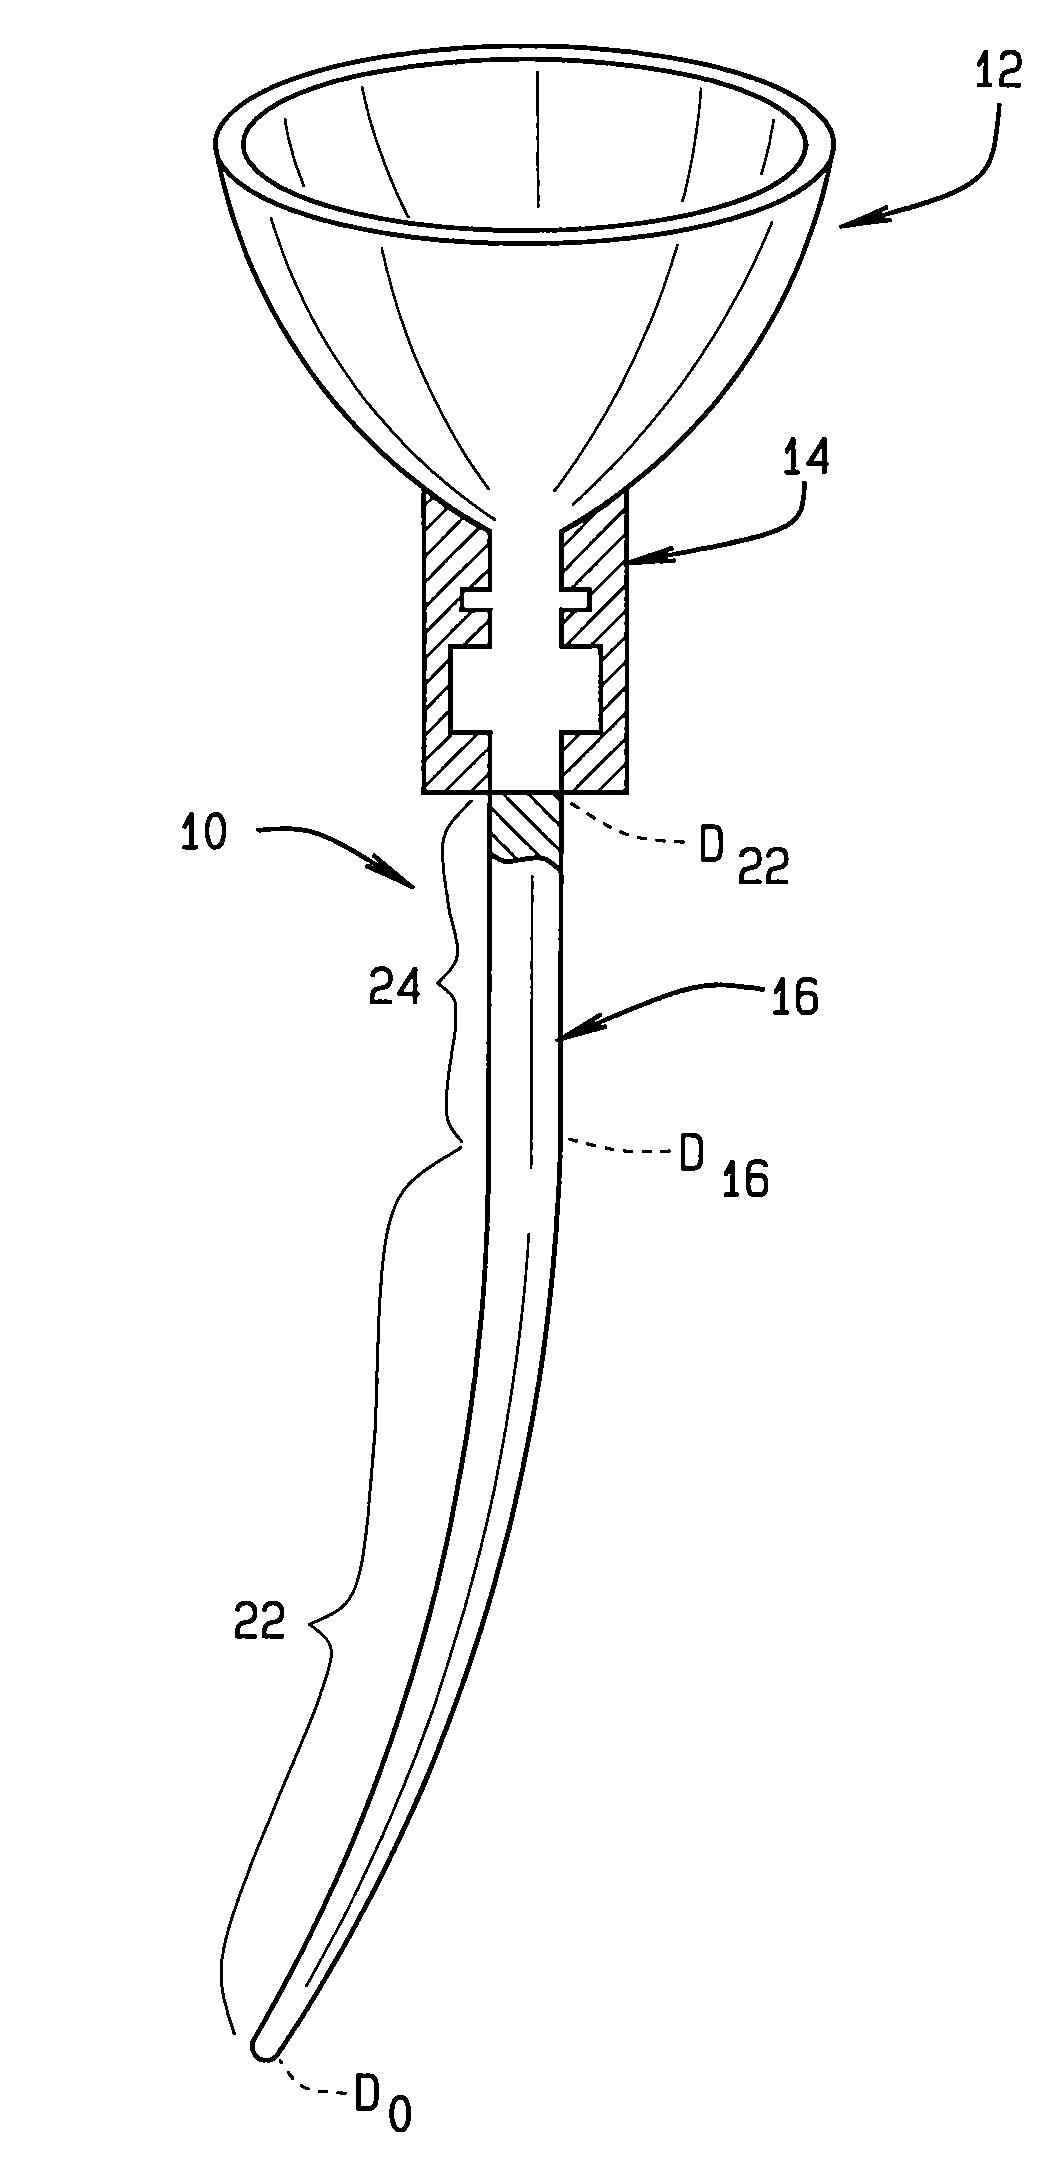 Method for cleaning a root canal system